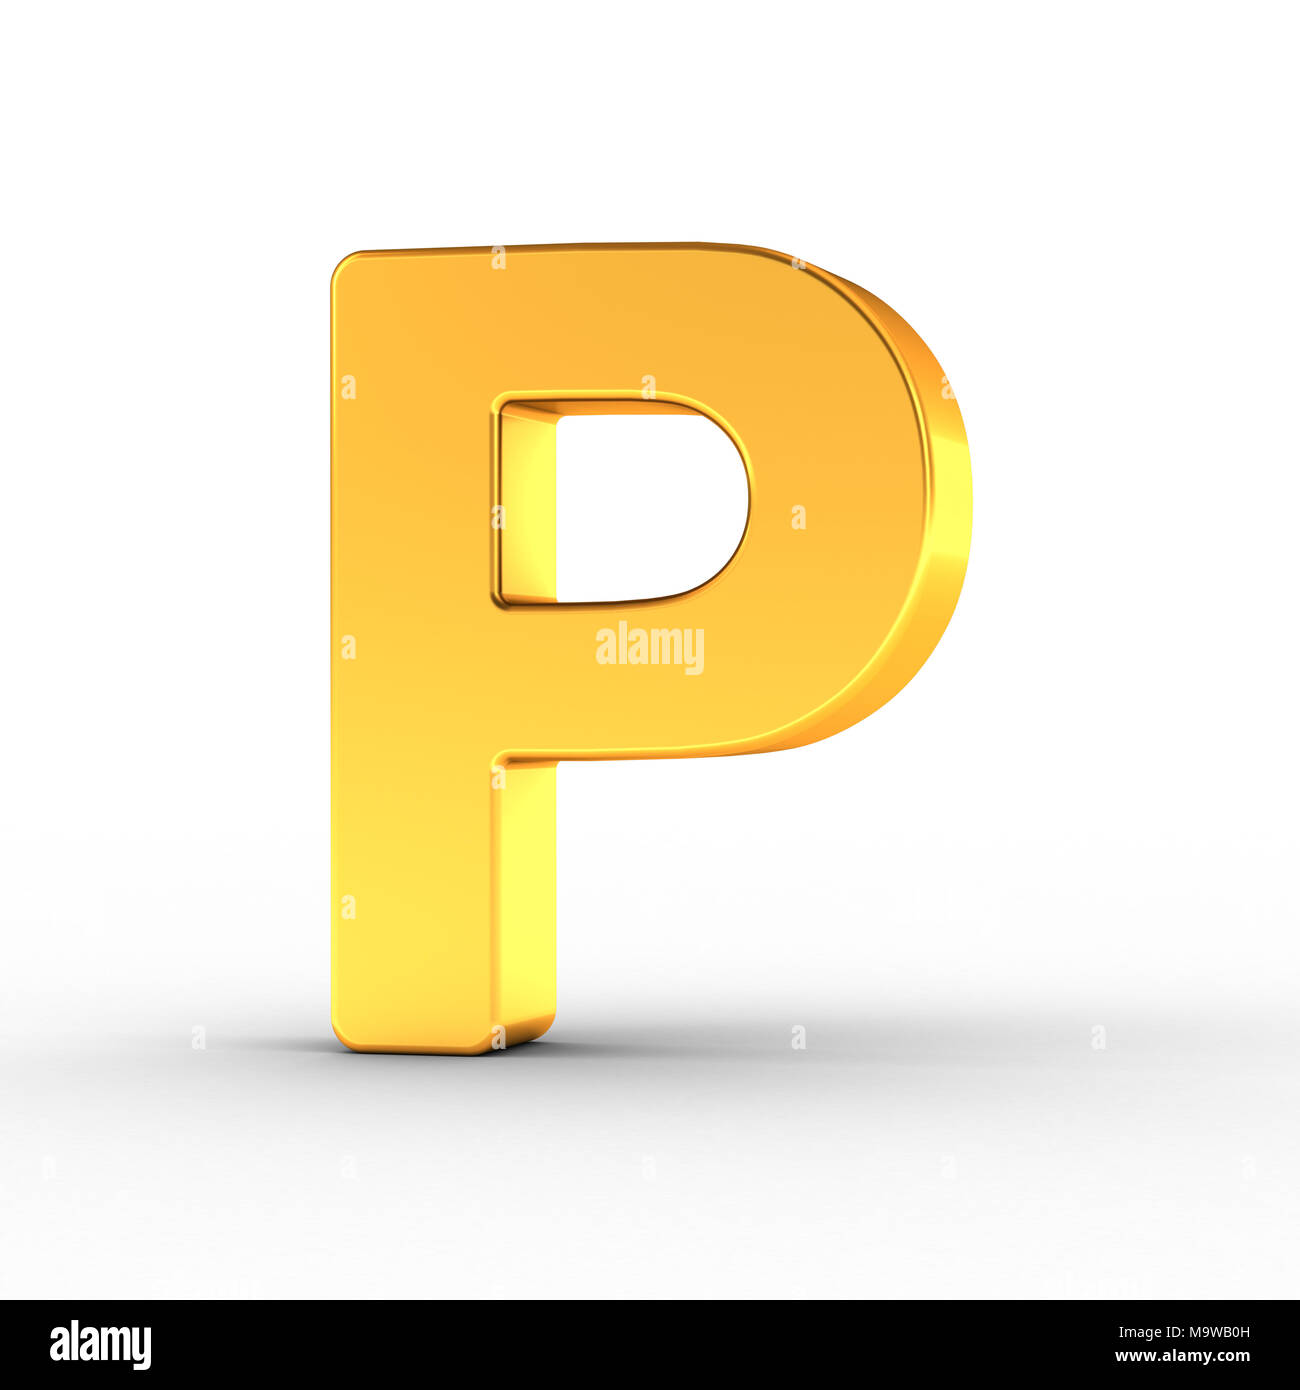 The Letter P as a polished golden object over white background with clipping path for quick and accurate isolation. Stock Photo